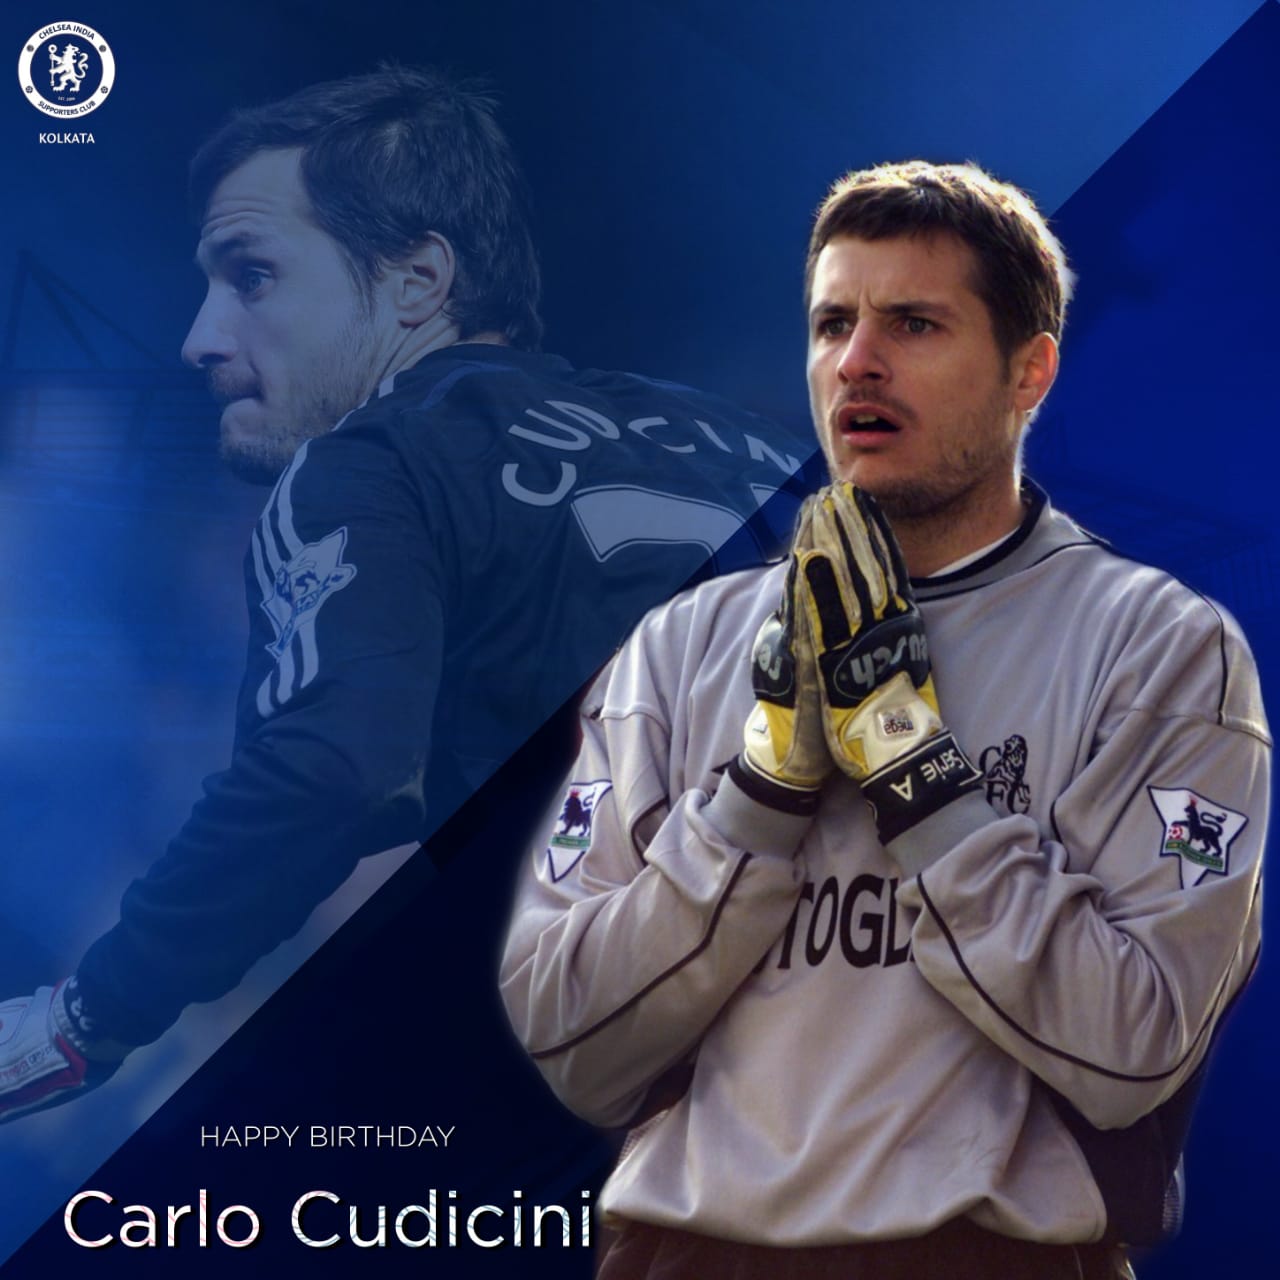 Wishing a very Happy Birthday to our club ambassador and two times FA Cup winner, Carlo Cudicini   